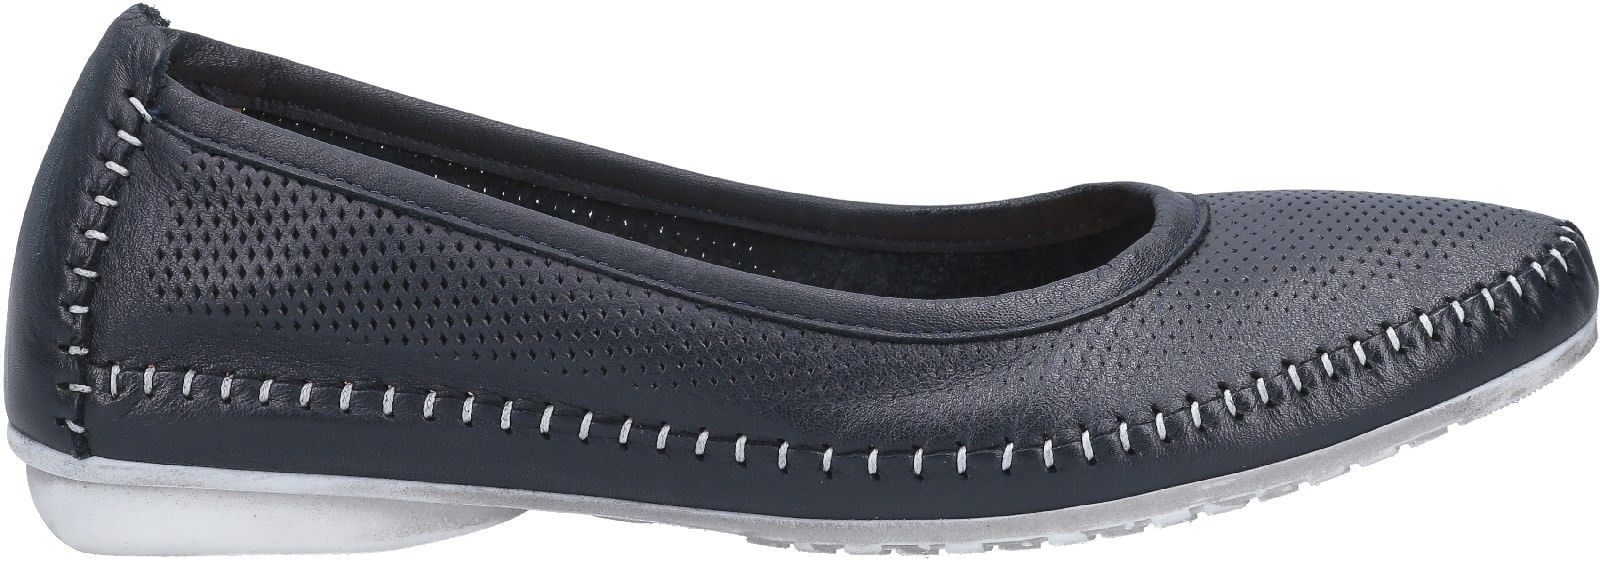 Women's slip on ballerina shoe with stylish stitching accents and perforated upper.Riva Brindisi slip on Pump shoe. Lightweight and casual pumps with soft leather uppers and leather footbed..